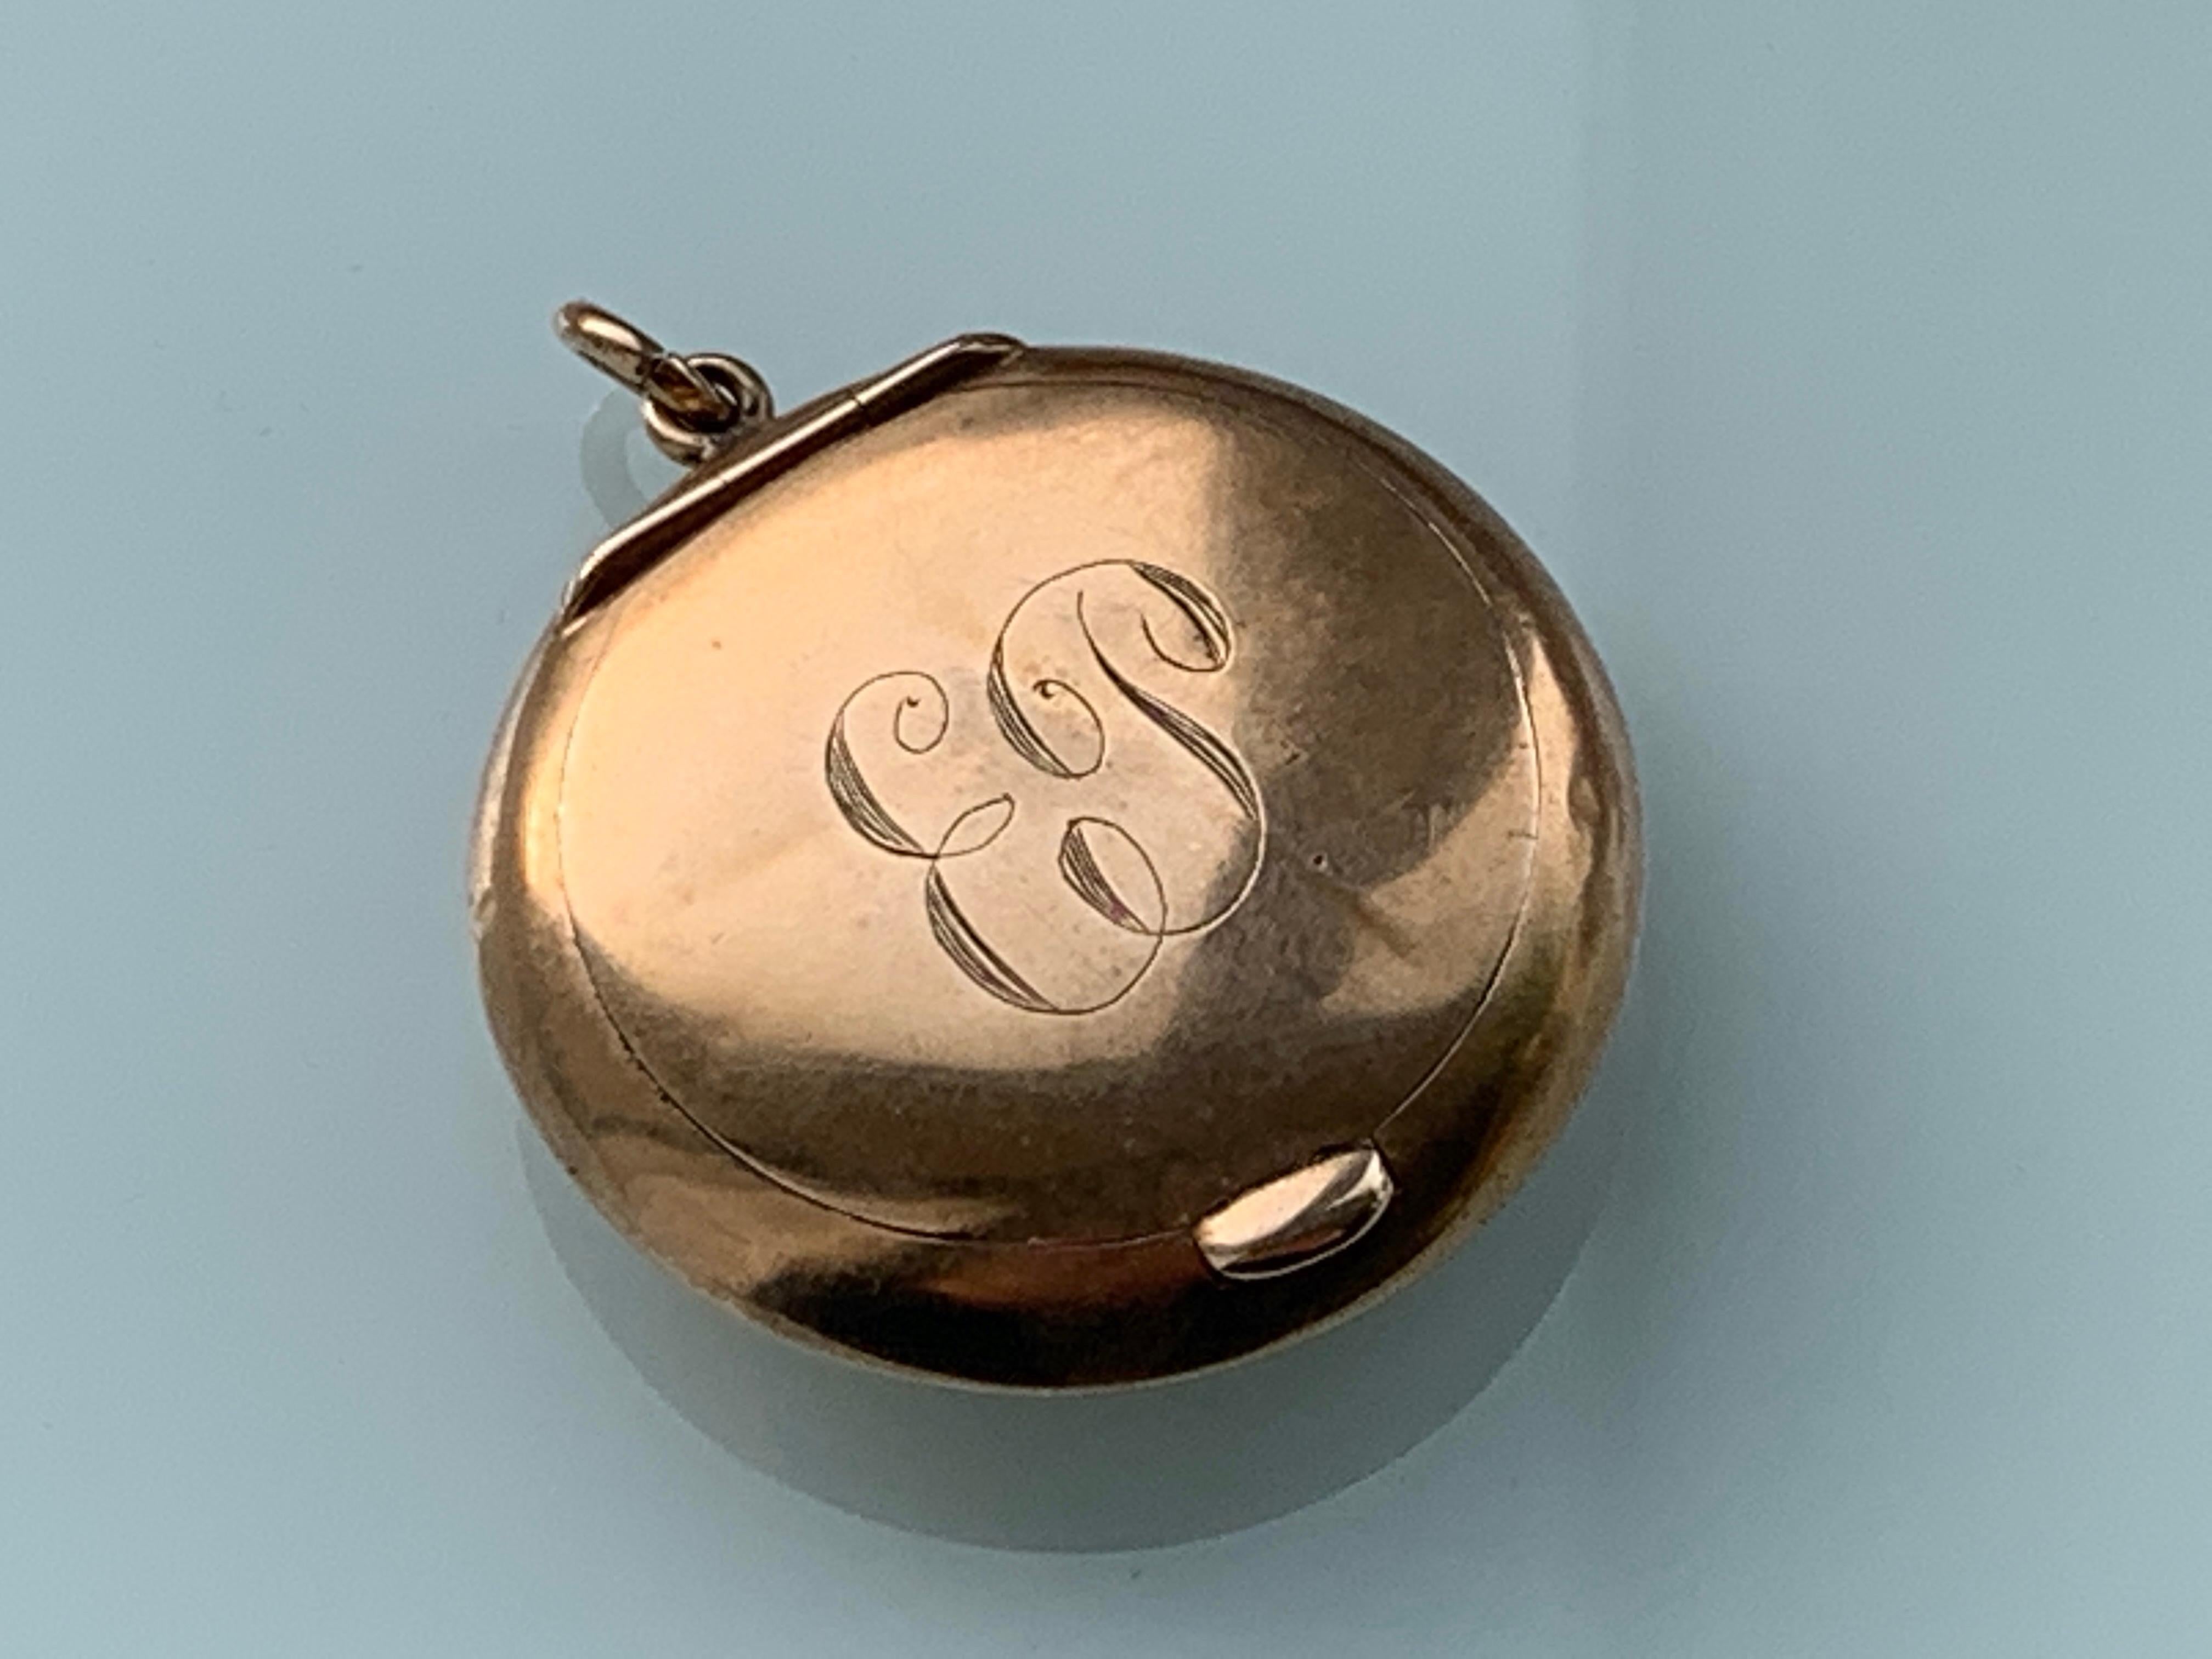 Rare 9ct Gold Powder compact 
for an Edwardian Chatelaine Chain 
worn around the waist of a woman in 1900s
This one is engraved E P.
The hallmarks are set inside to the base.
Birmingham anchor, 9 and a duty mark head
Closure is secure.